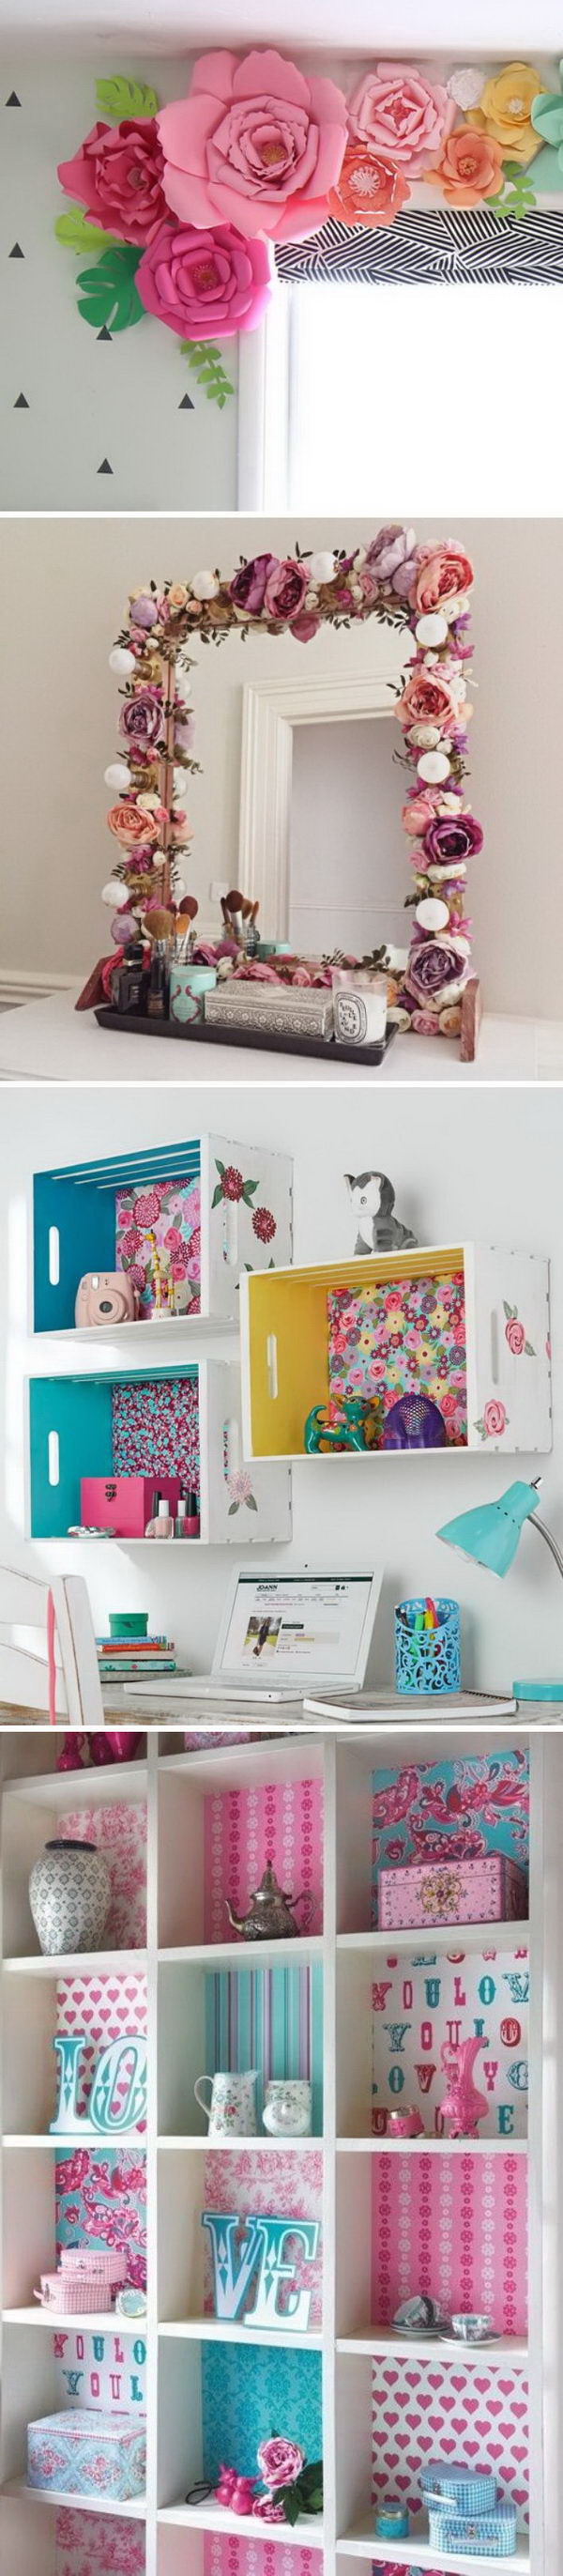 Fantastic DIY projects to decorate a girl's bedroom. 